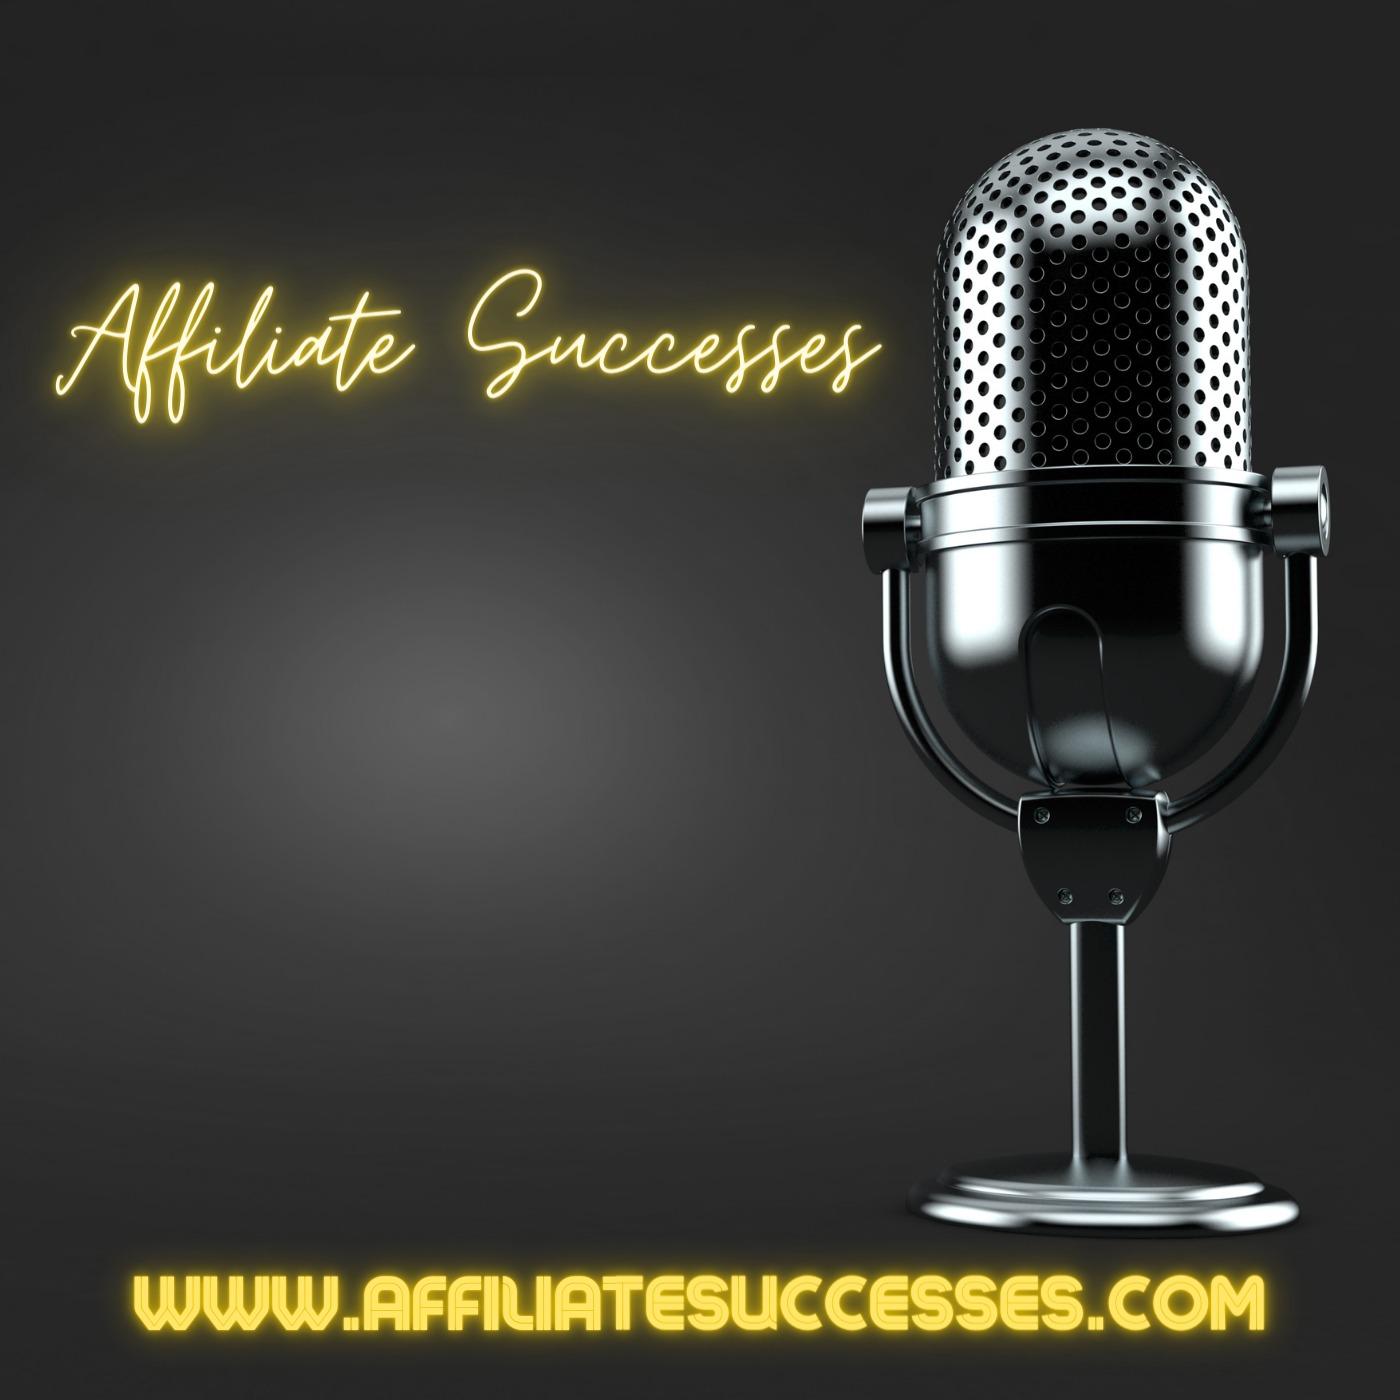 Affiliate Successes - Affiliate marketing for absolute beginners